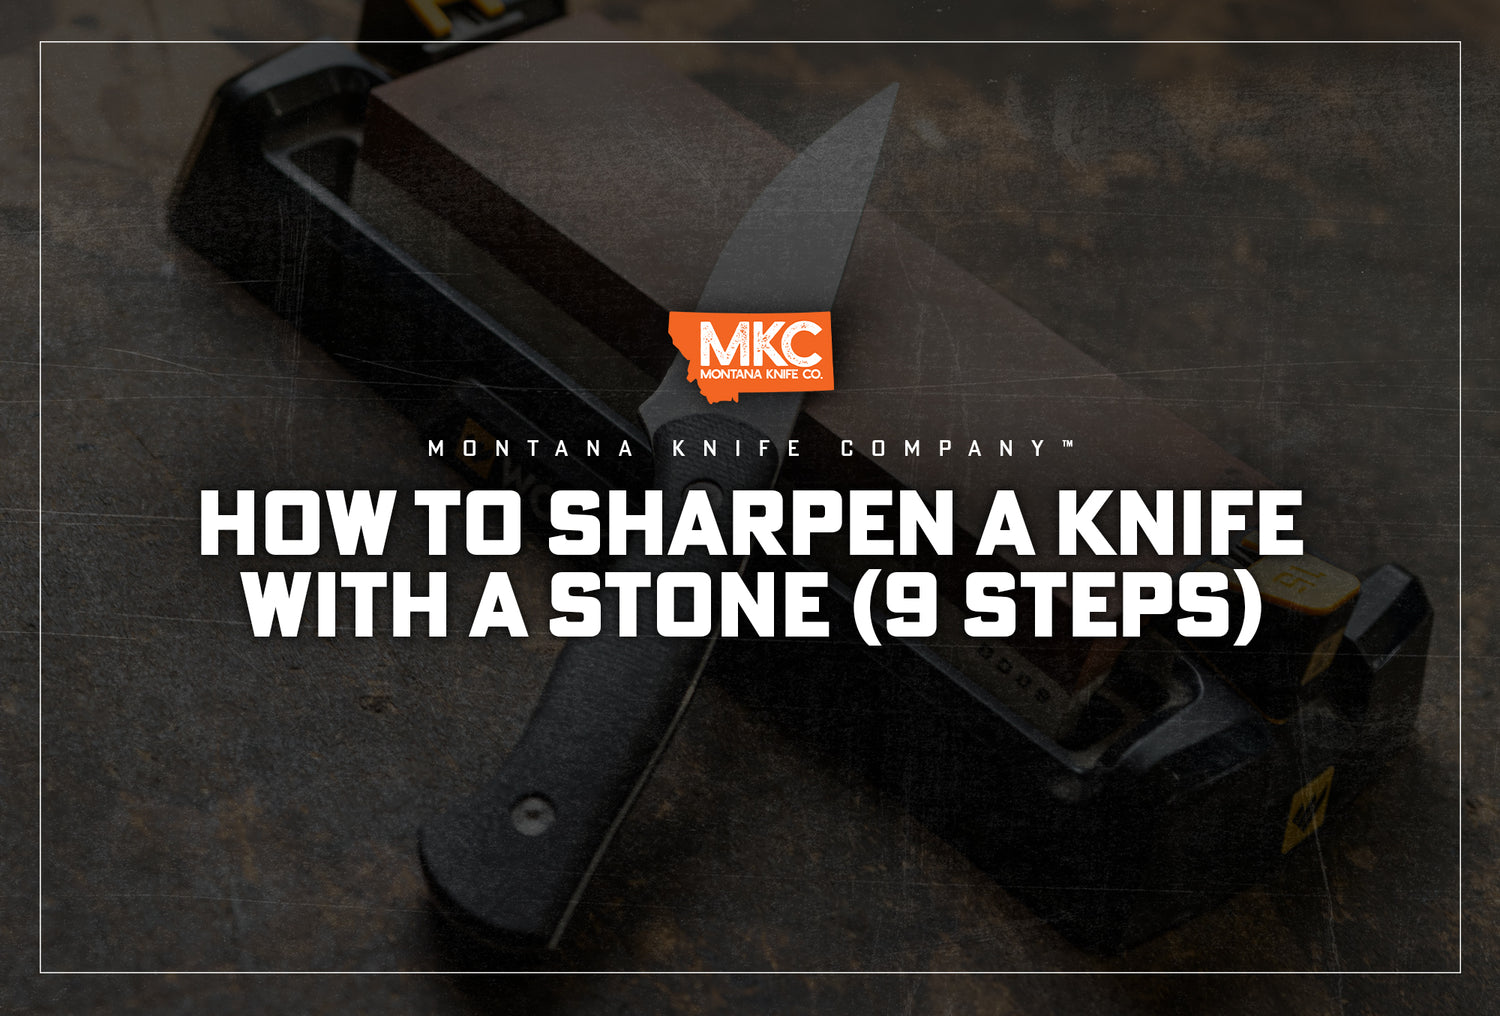 How to Sharpen a Knife With a Stone (9 Steps)